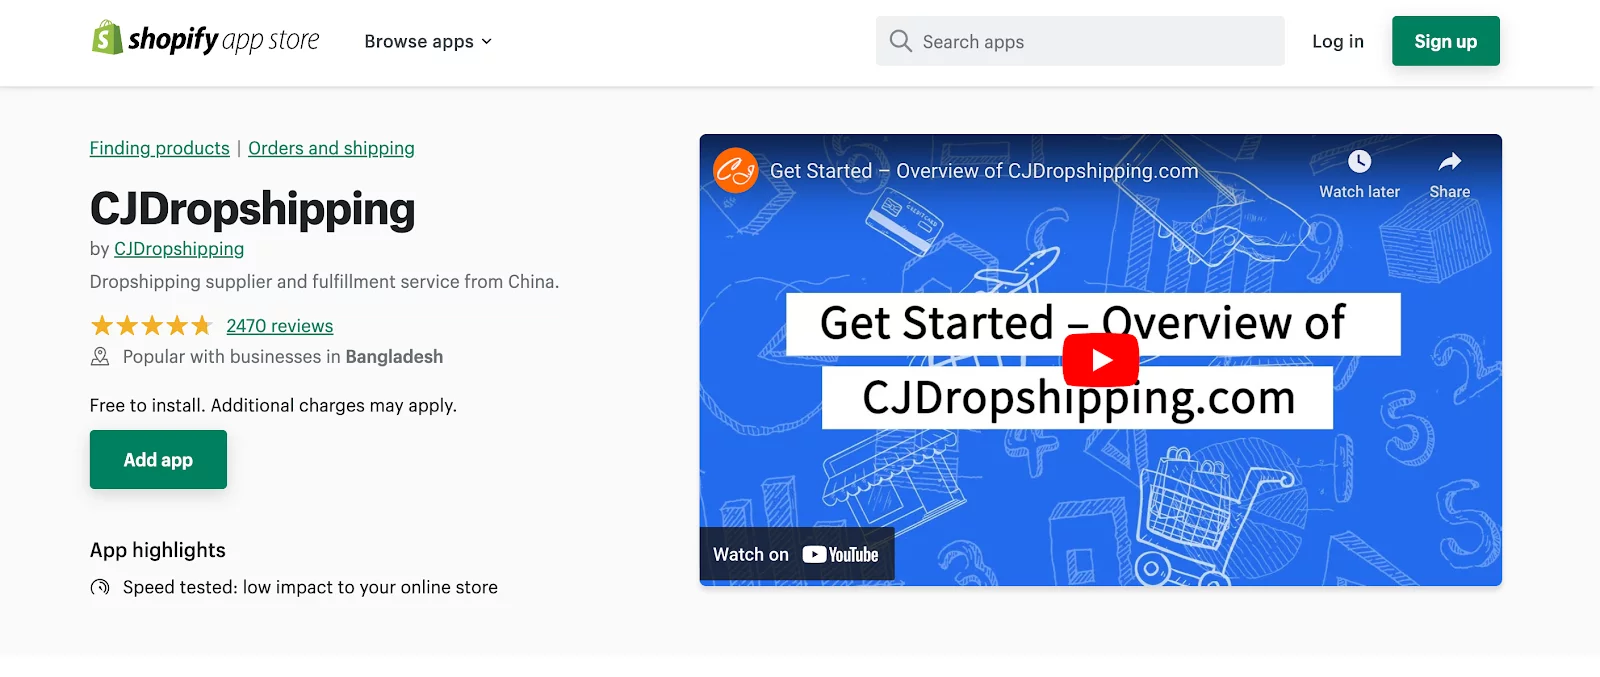 Shopify Apps for Dropshipping - CJDropshiping